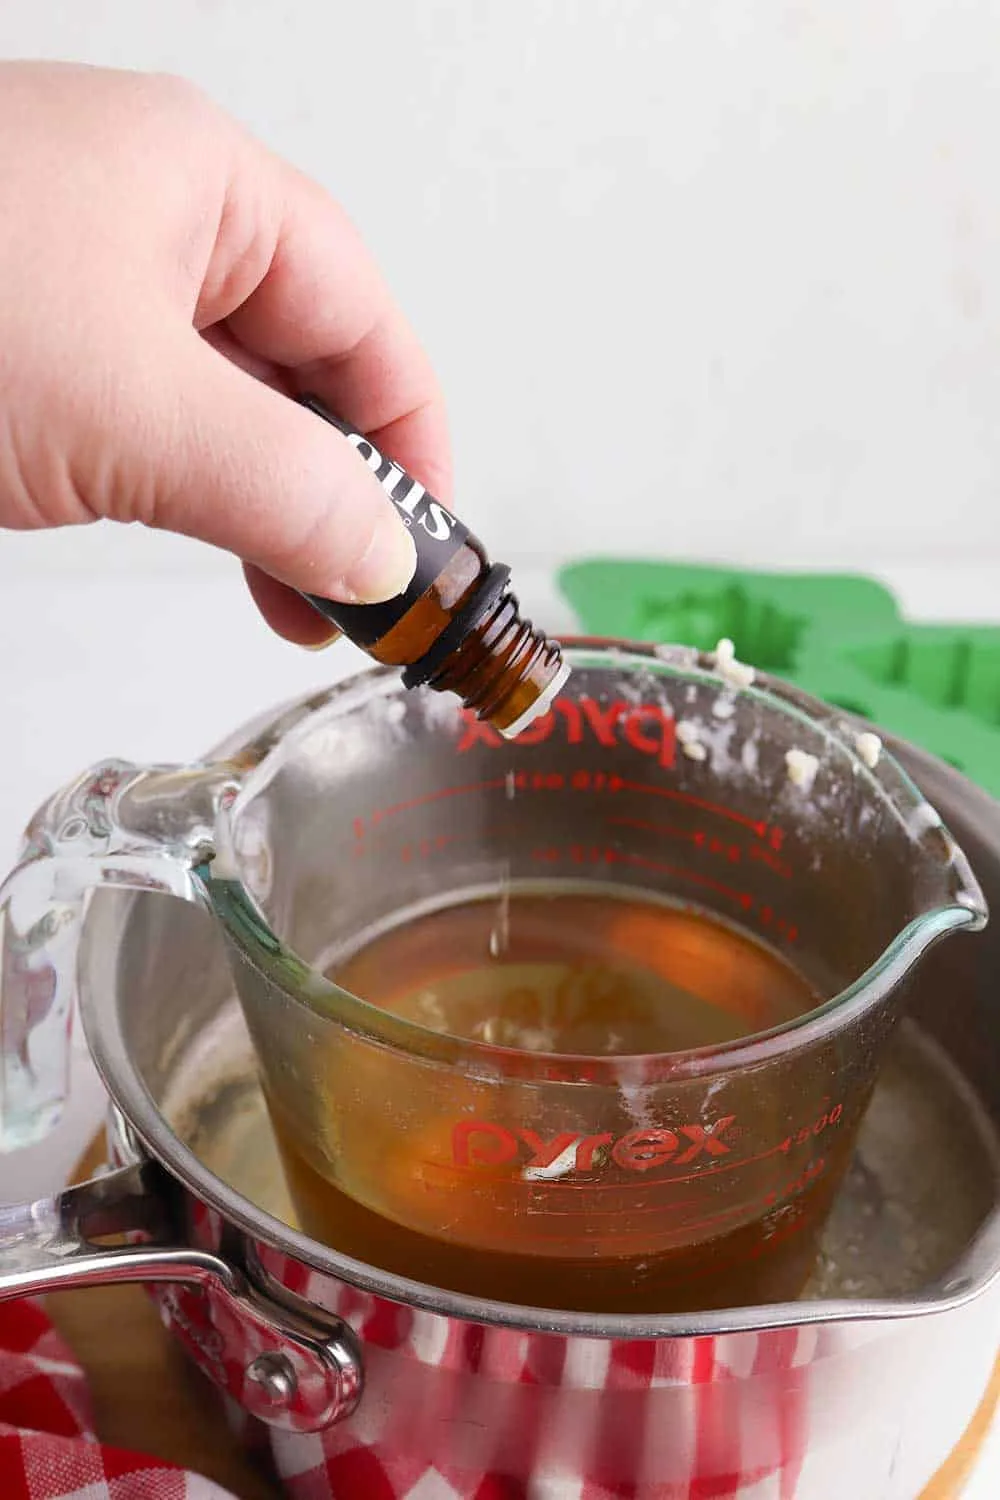 adding essential oils into melted beeswax